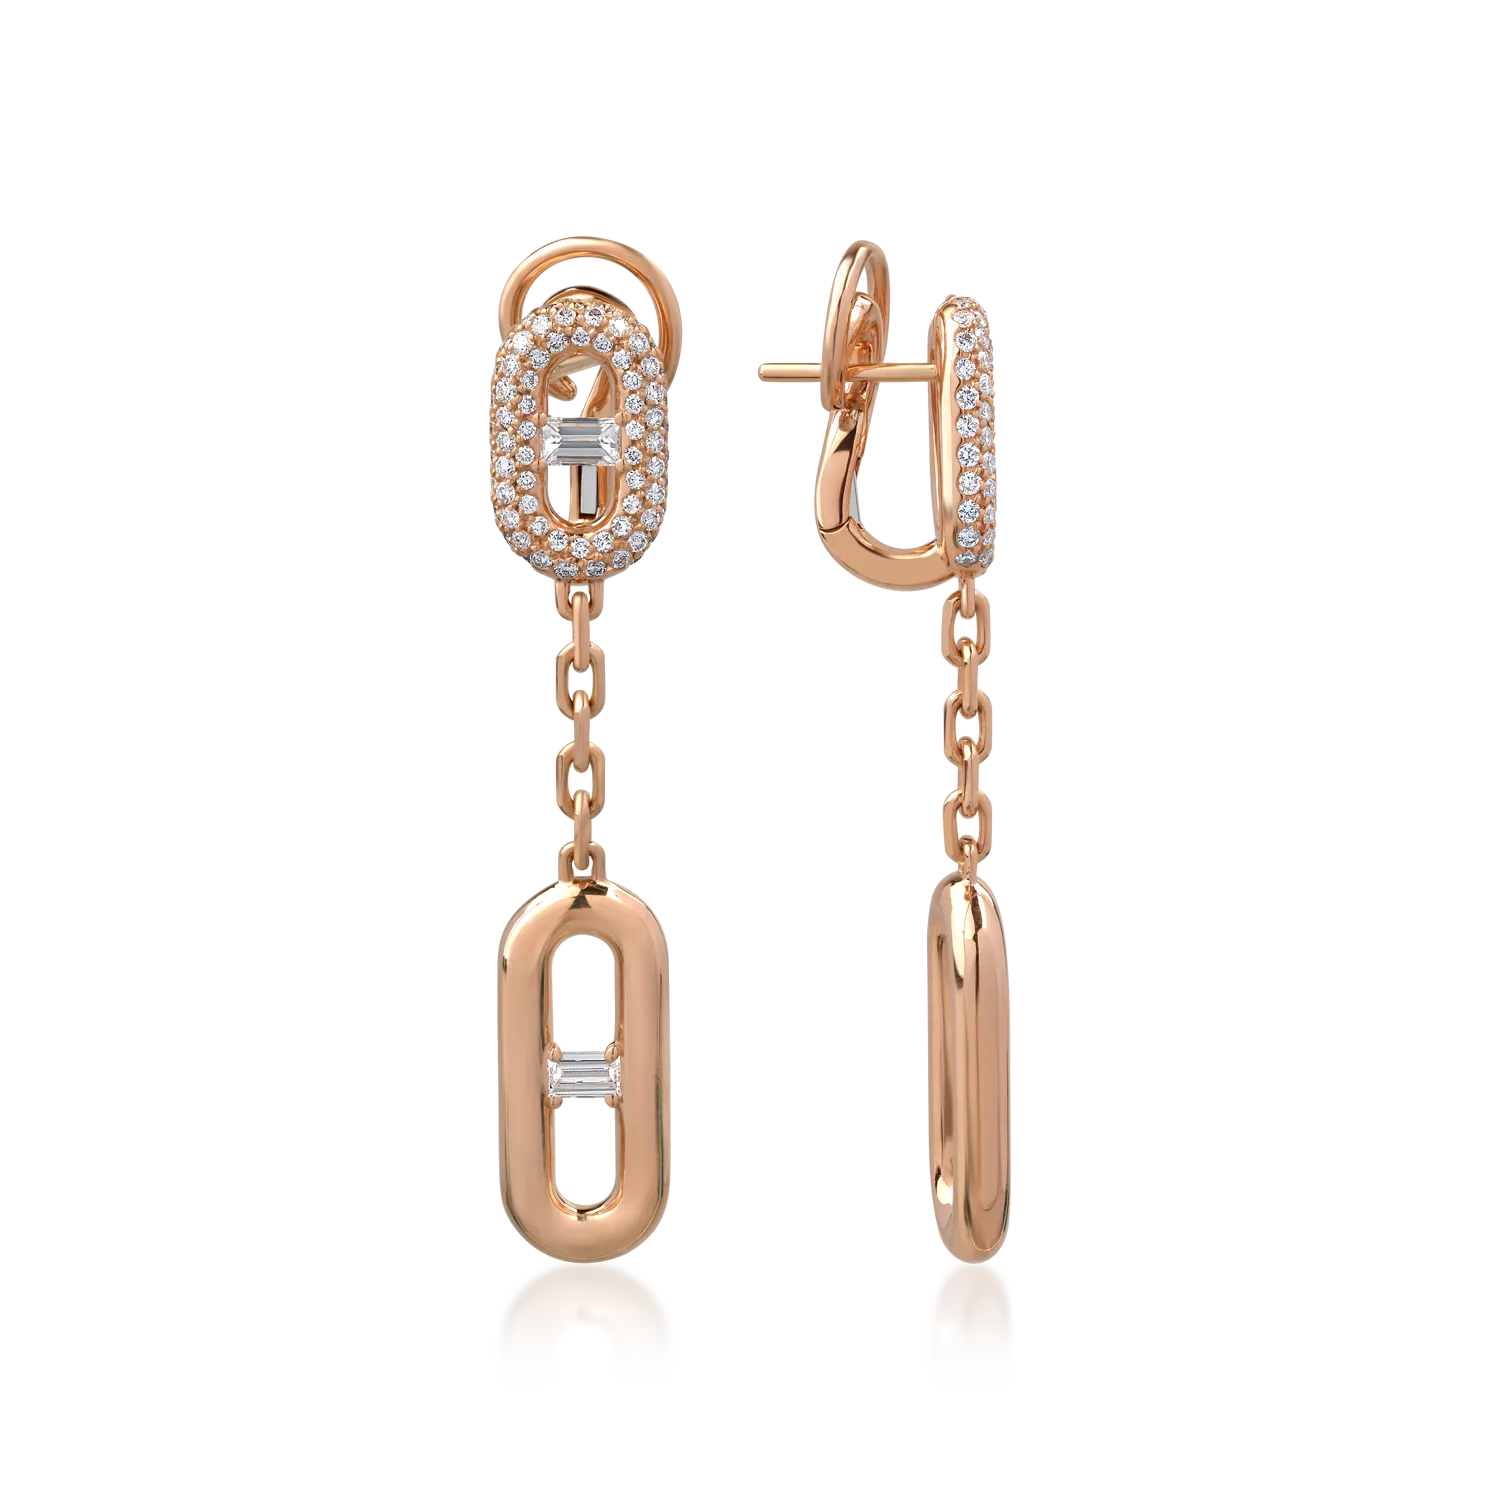 18K rose gold earrings with 1.4ct diamonds